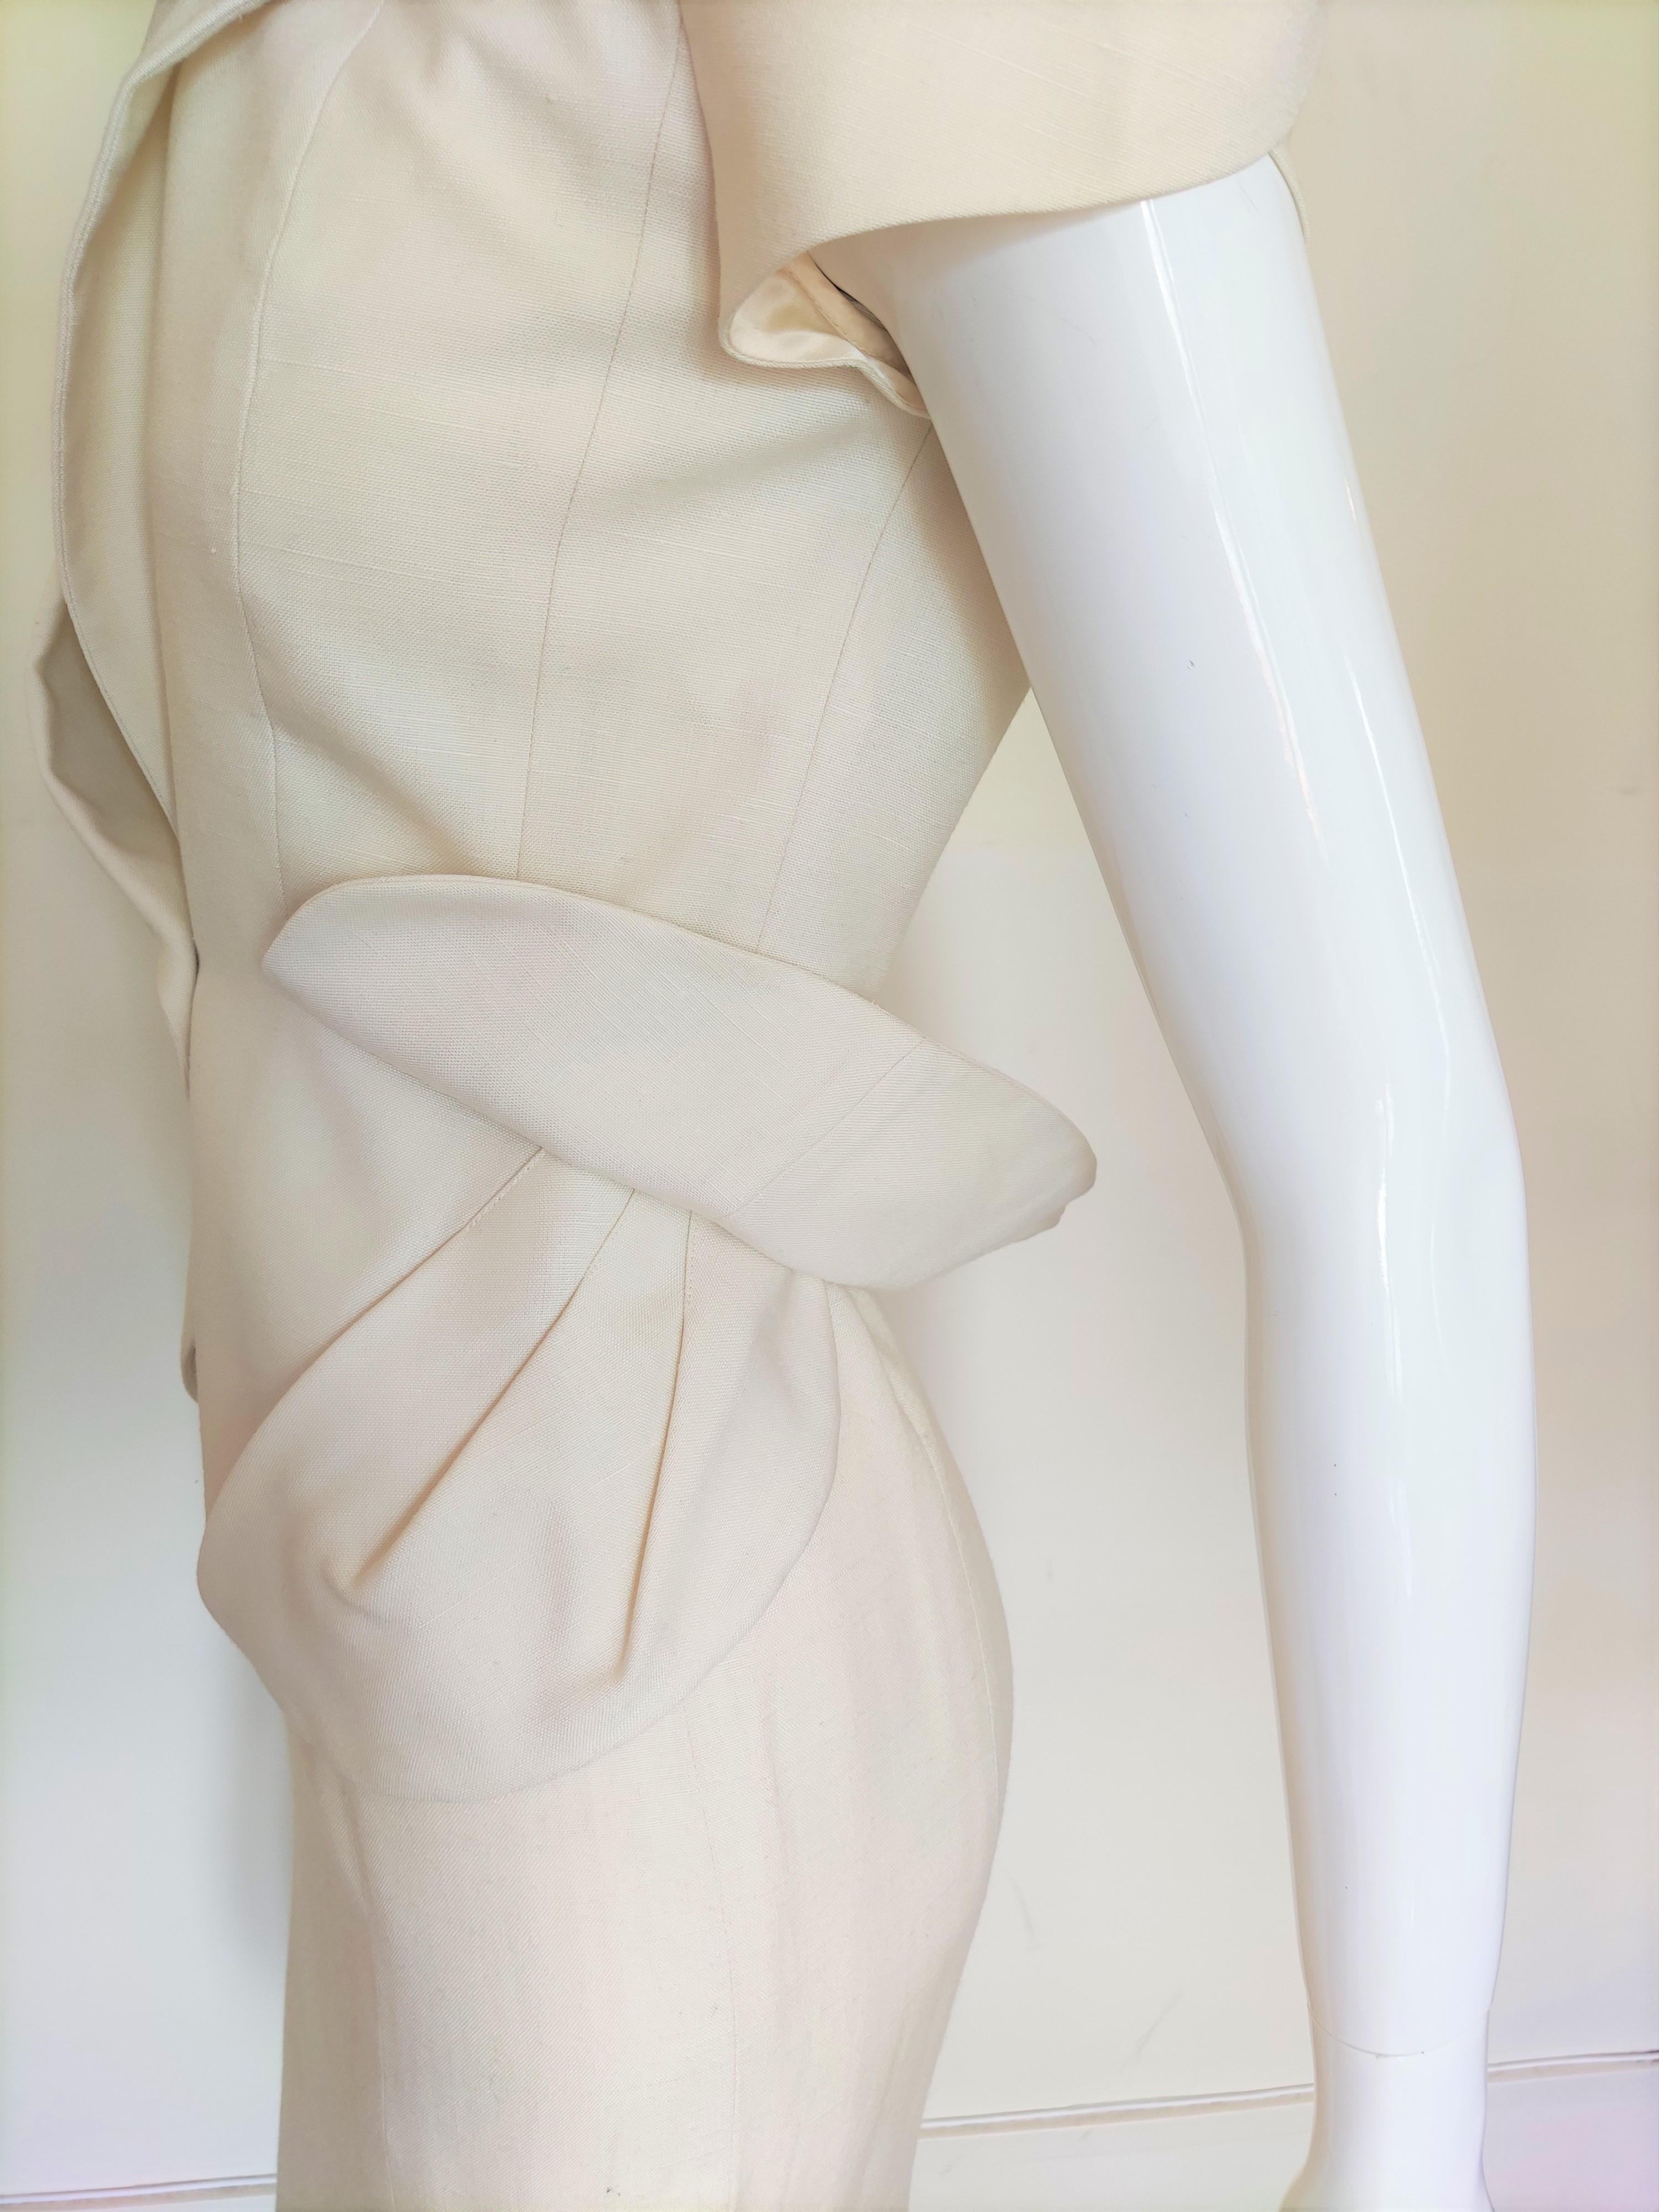 Early John Galliano S/S 1999 Runway Vintage Ivory Ensemble Dress Costume Suit For Sale 7